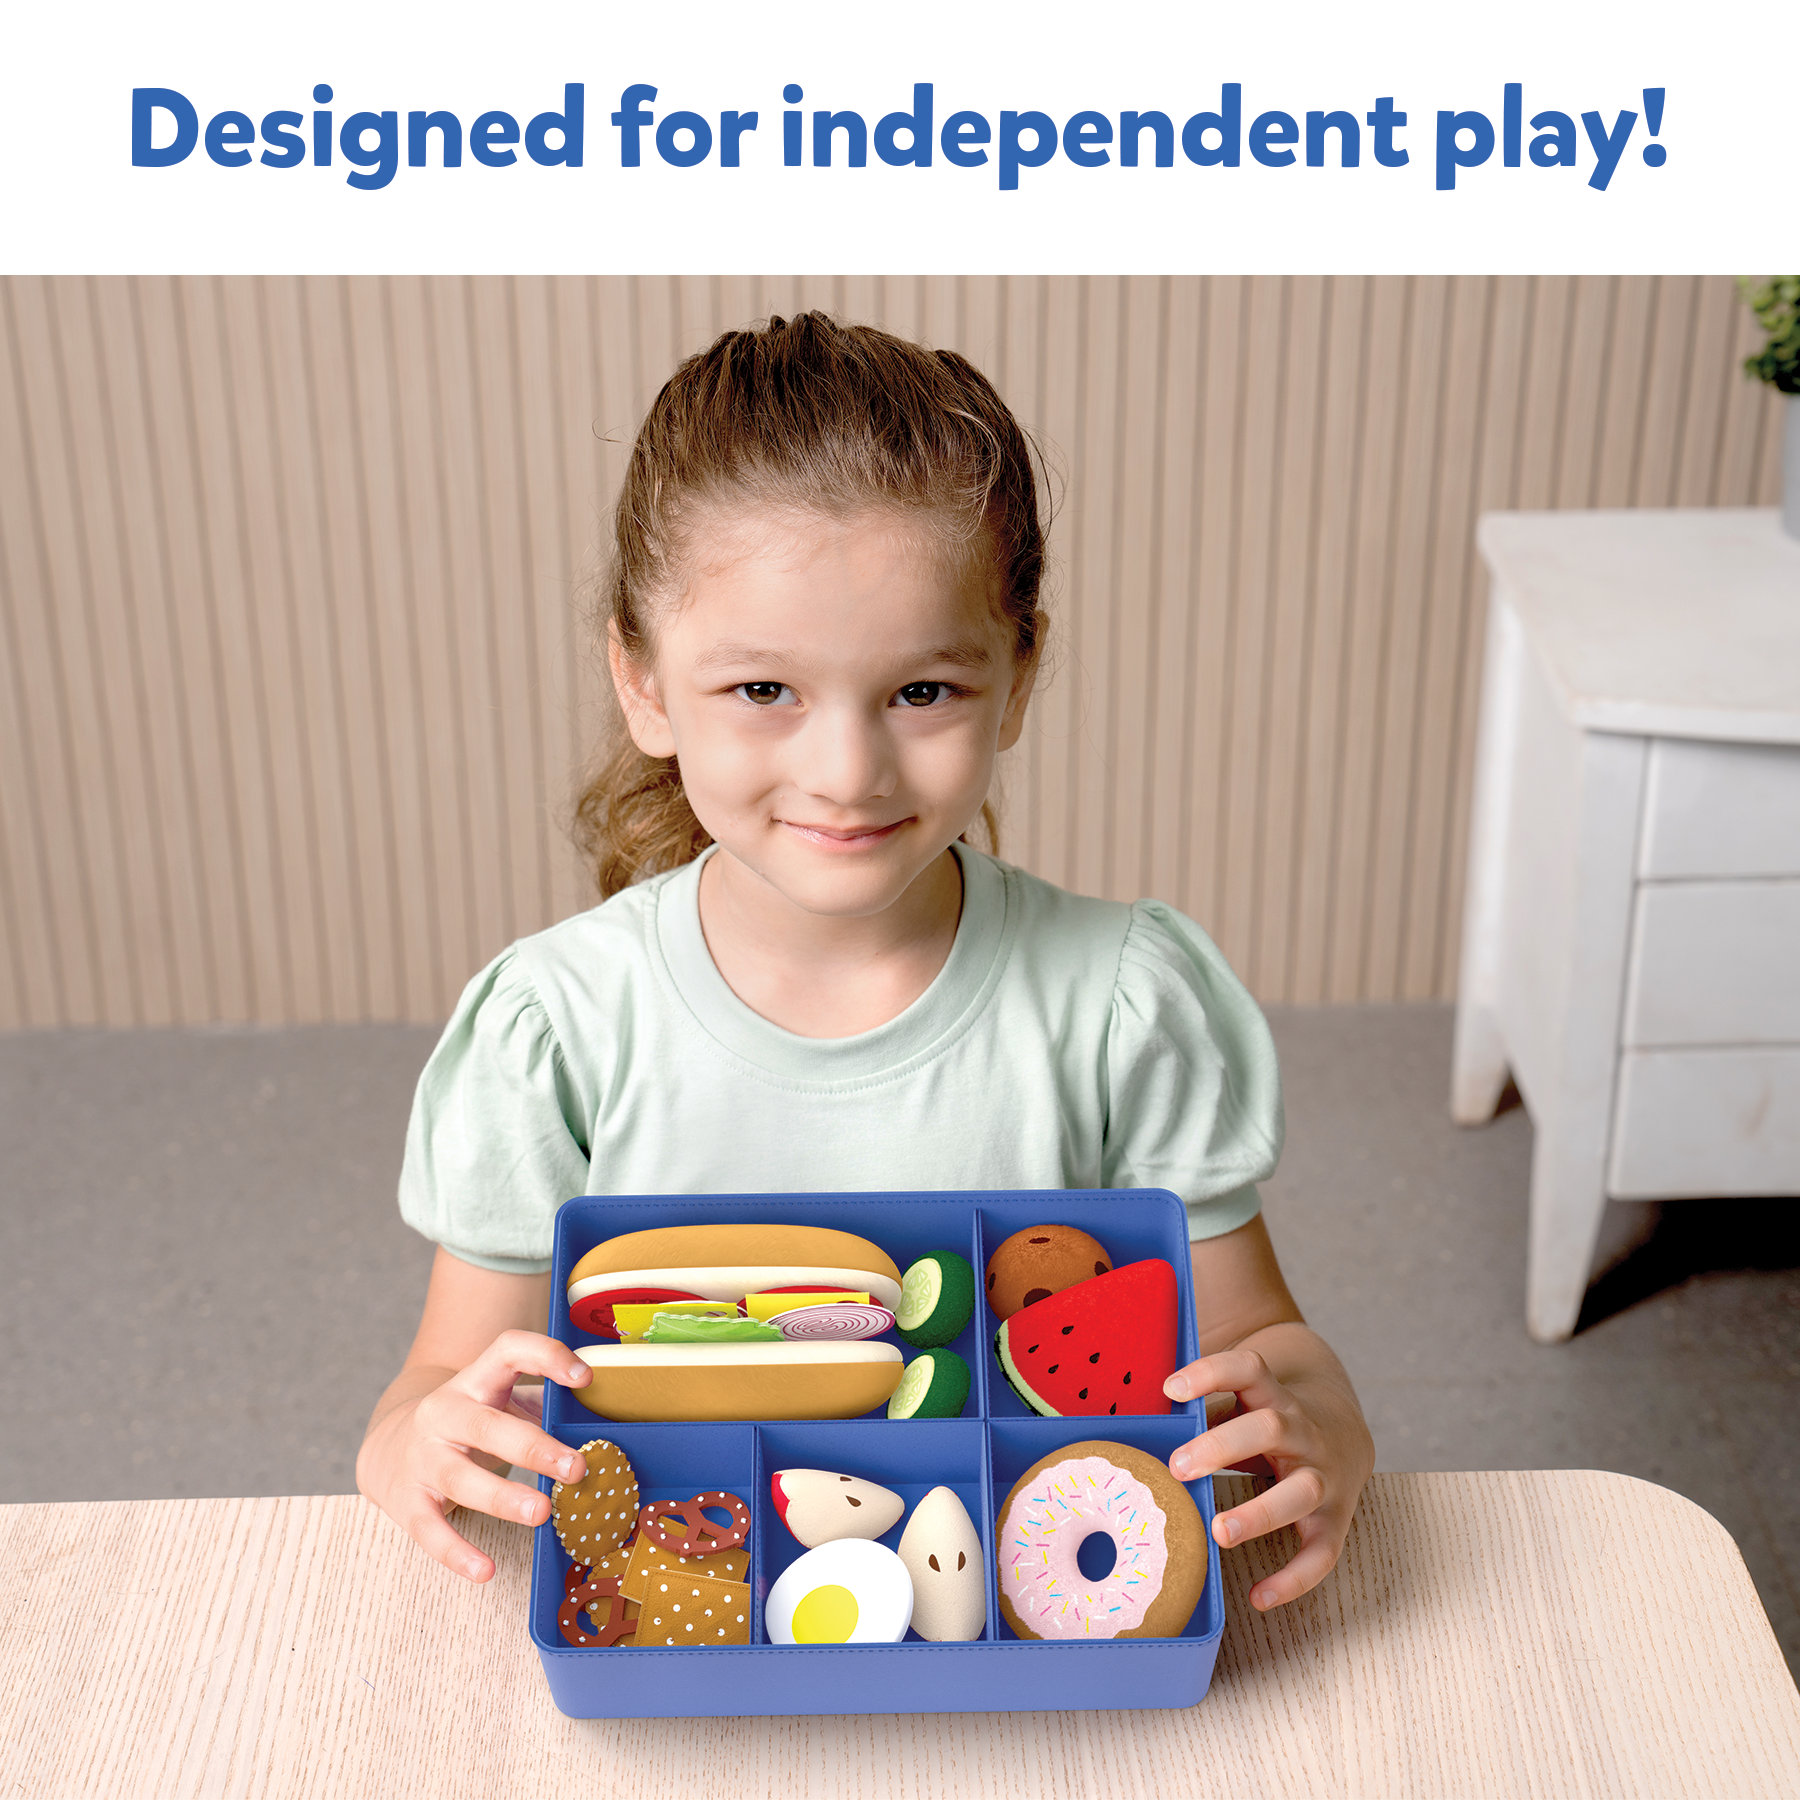 Skillmatics Bento Box - 35+ Felt Play Food Items, Pretend Play Kitchen Toys, Gifts For Kids Ages 3 To 7